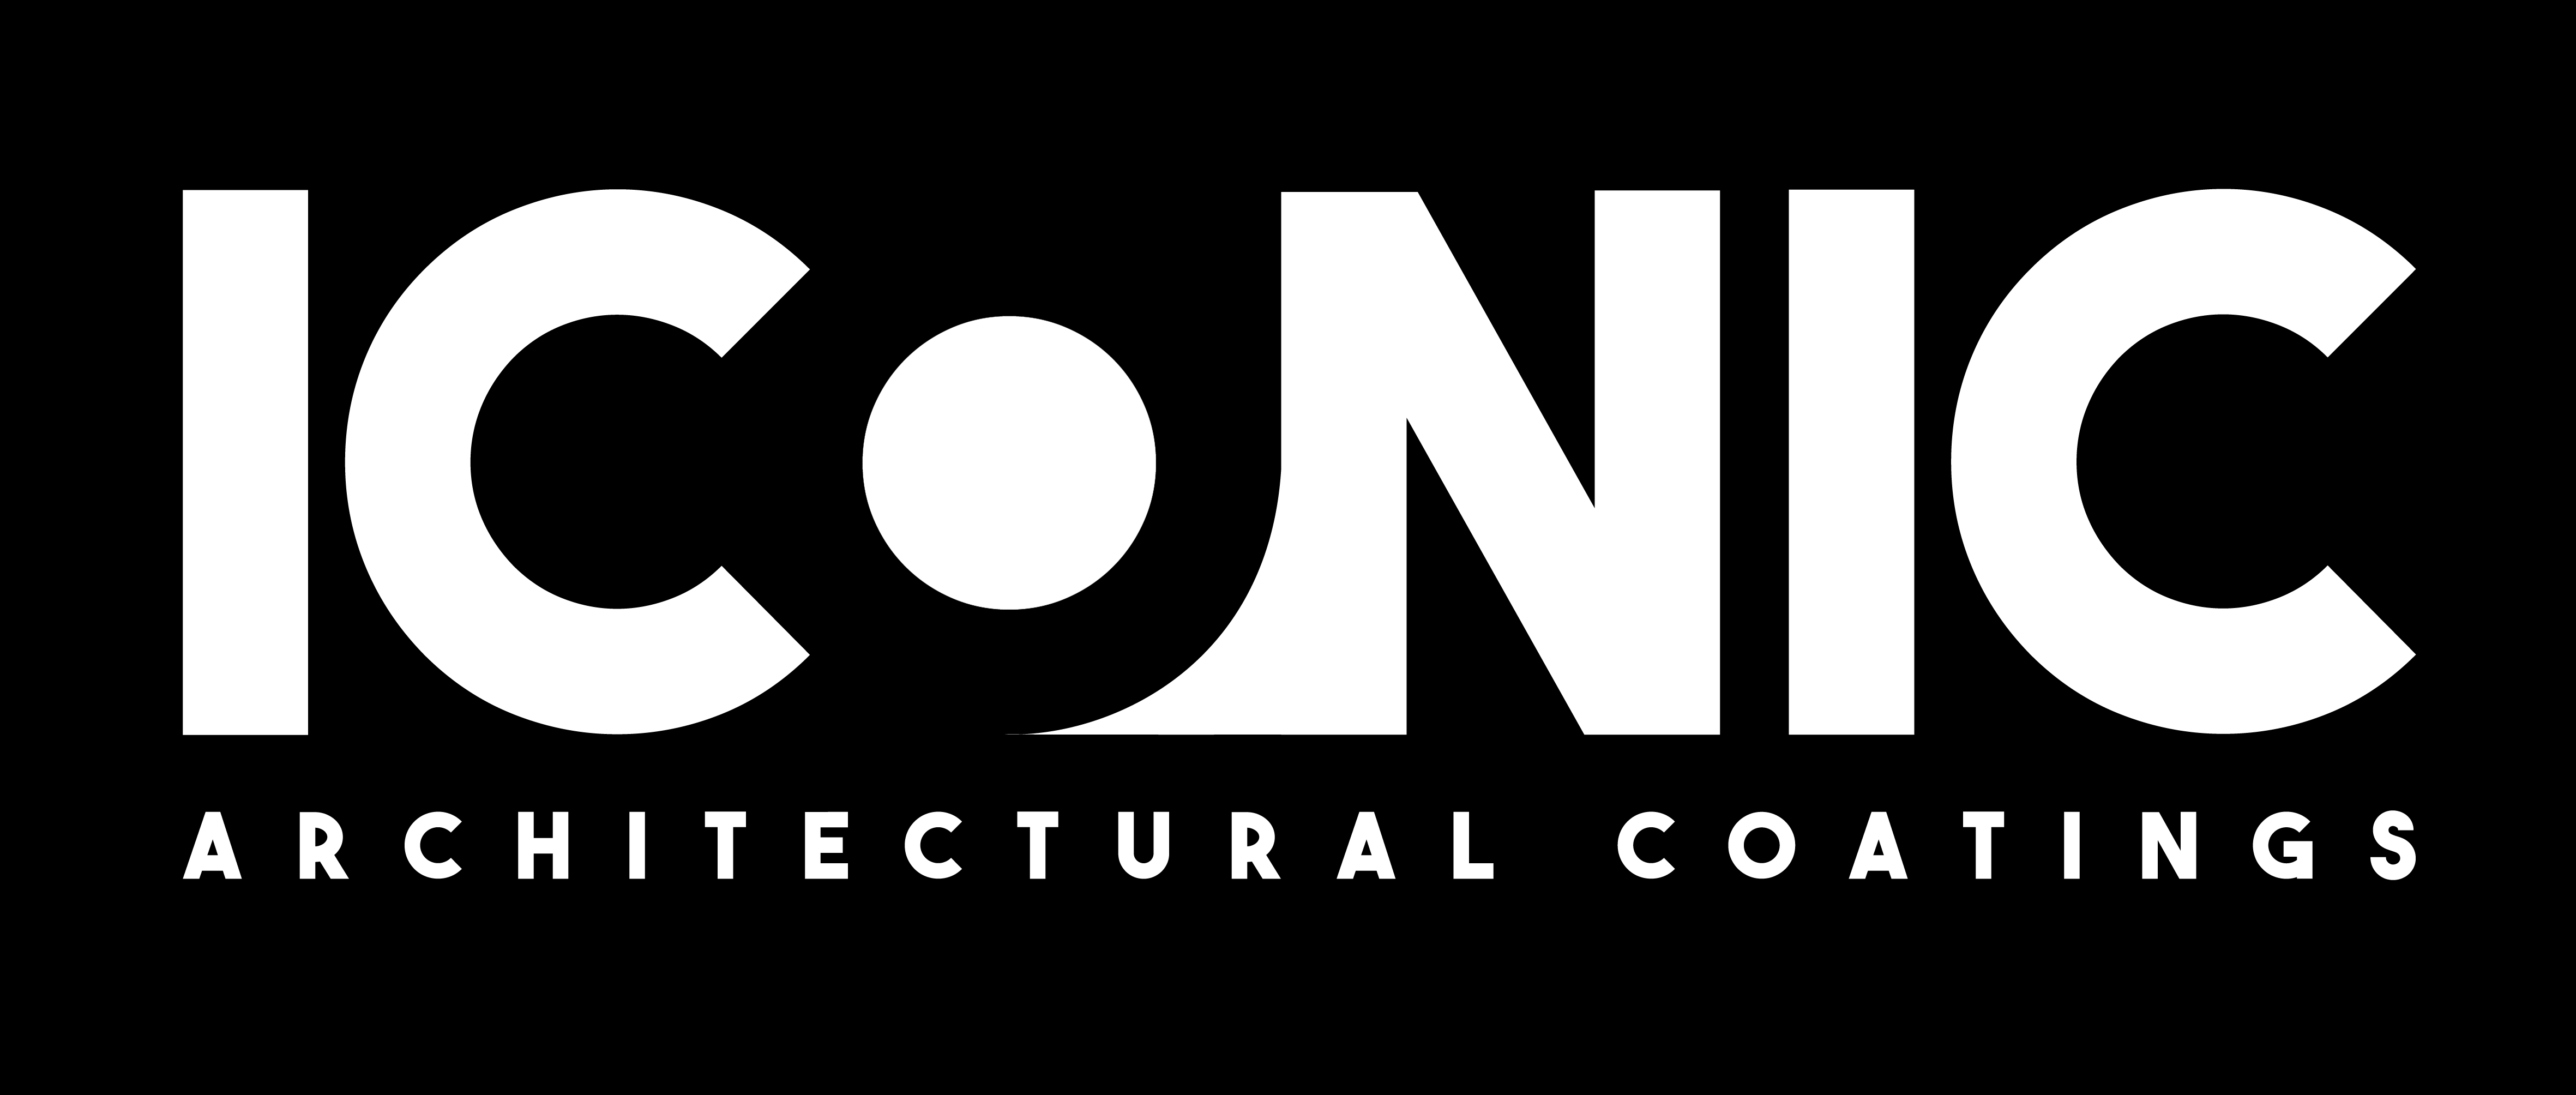 Iconic Architectural Coatings Pty Ltd